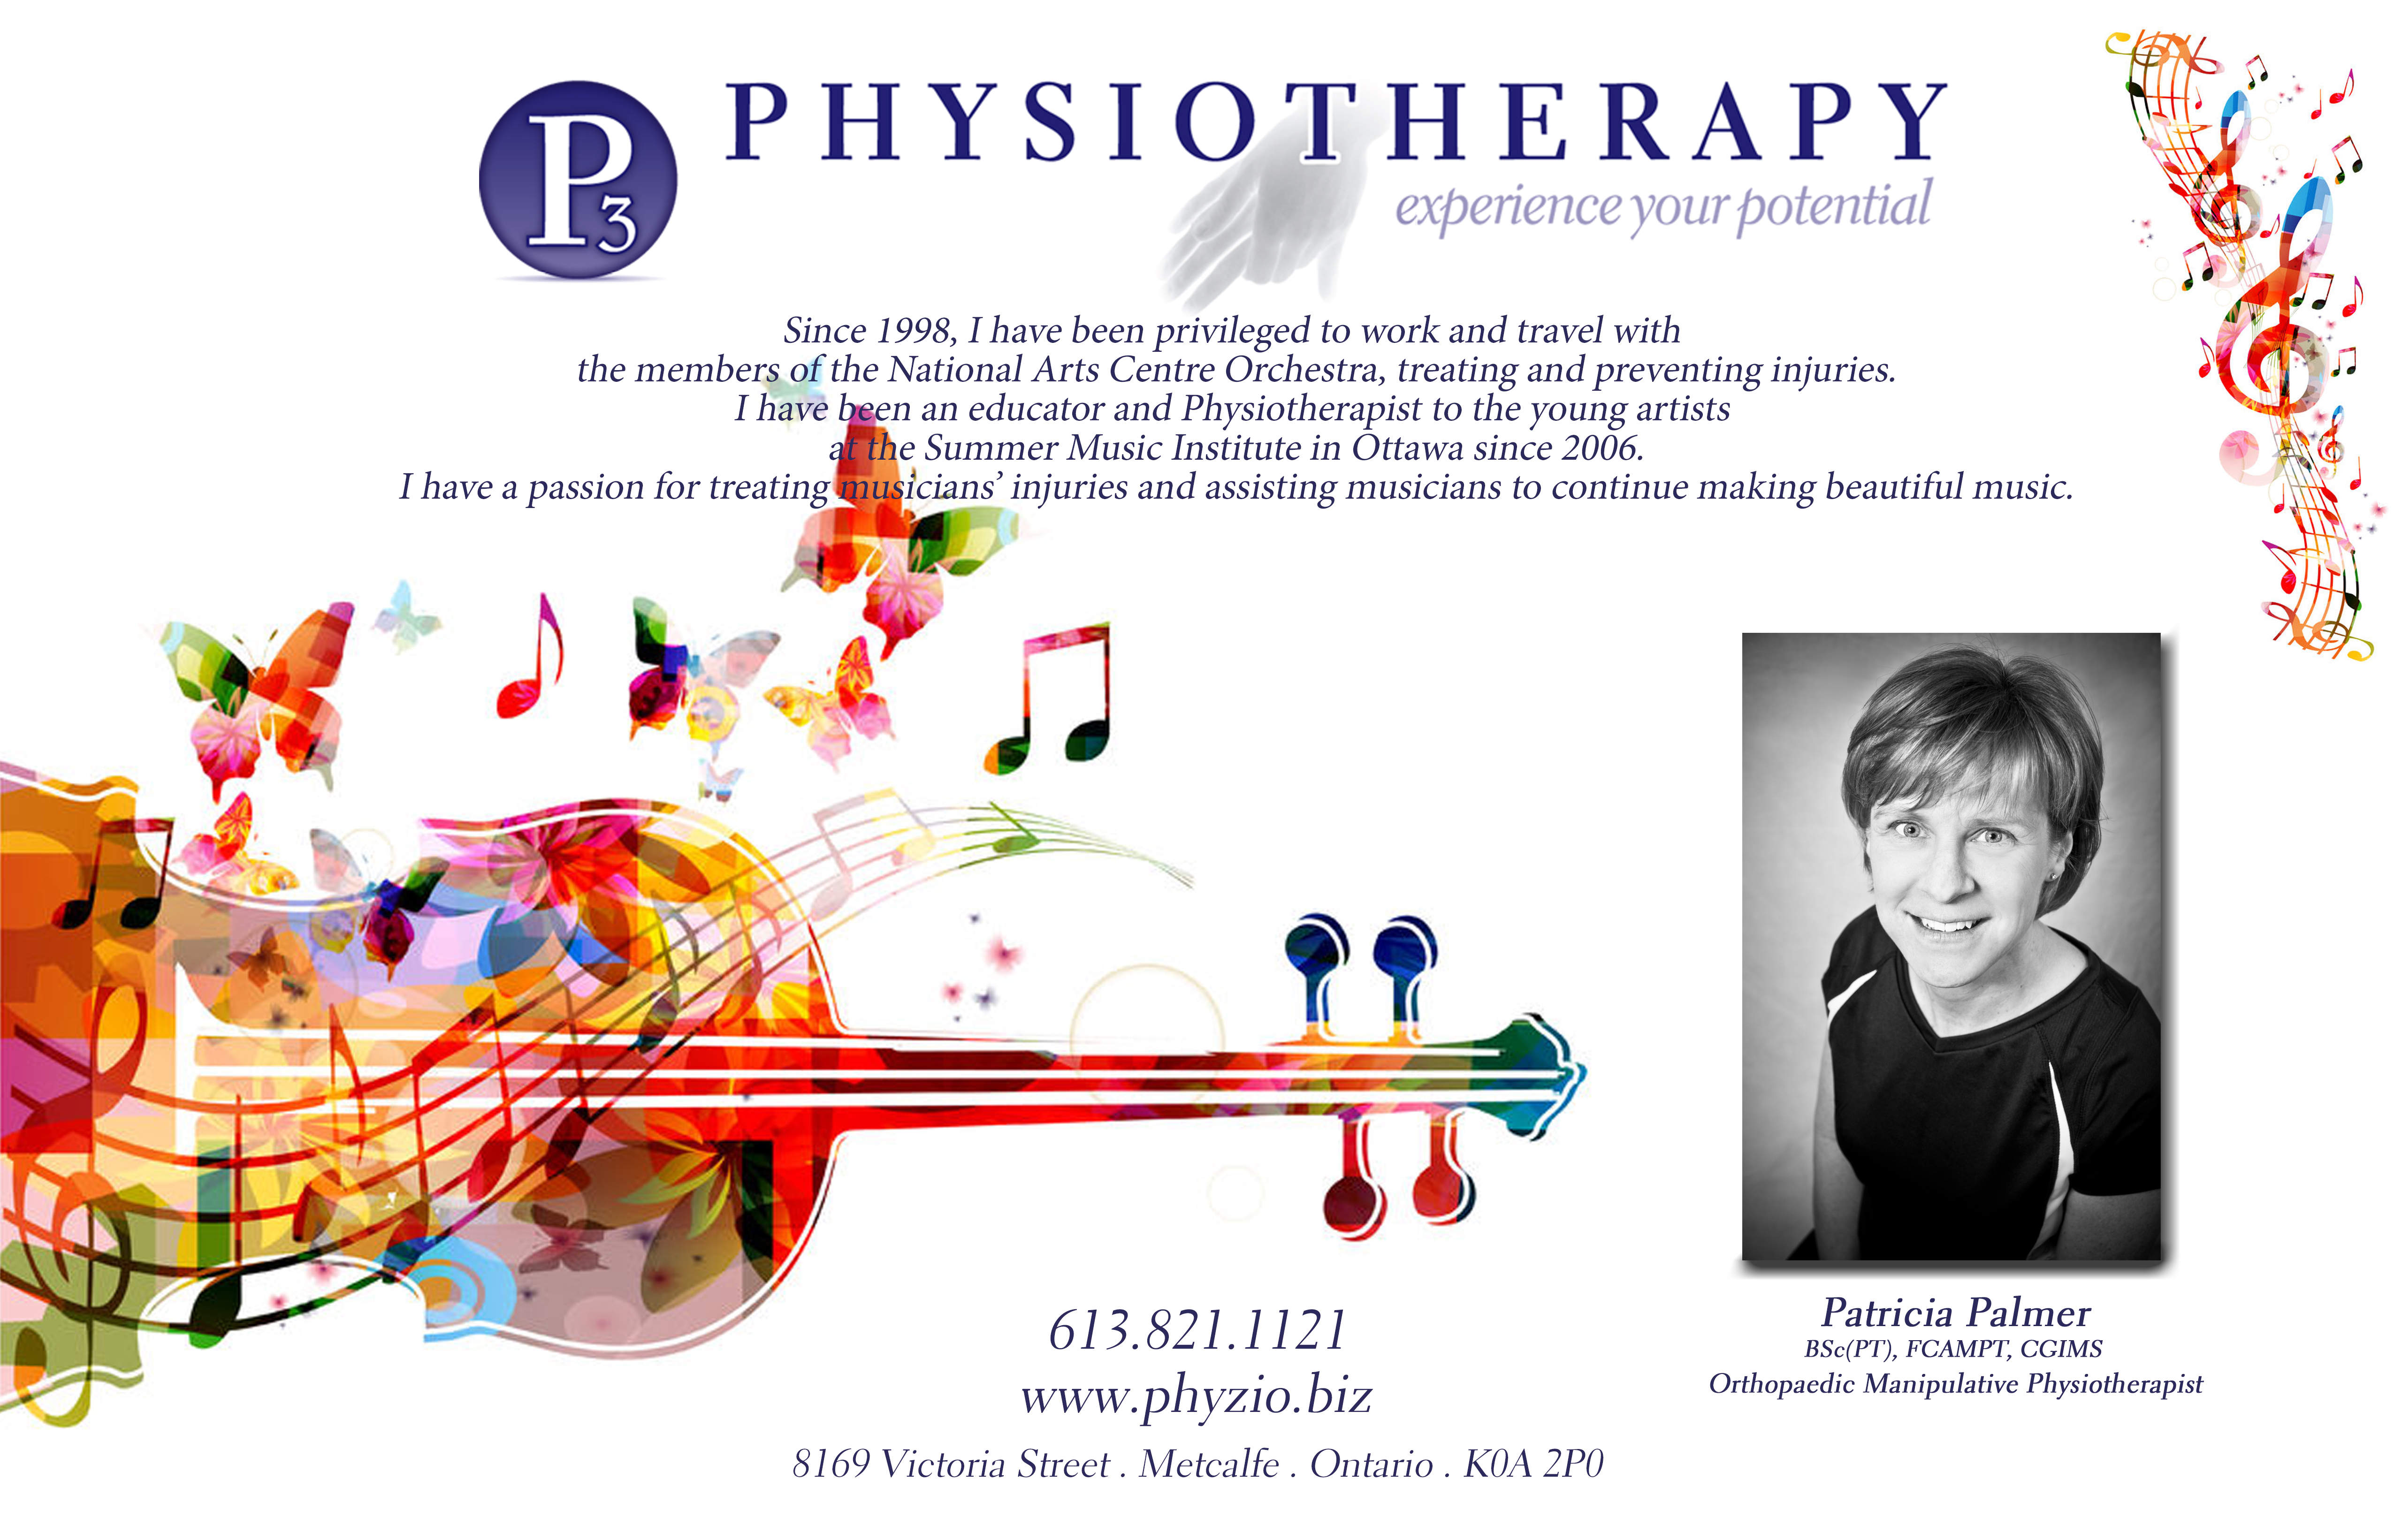 P3 Physiotherapy